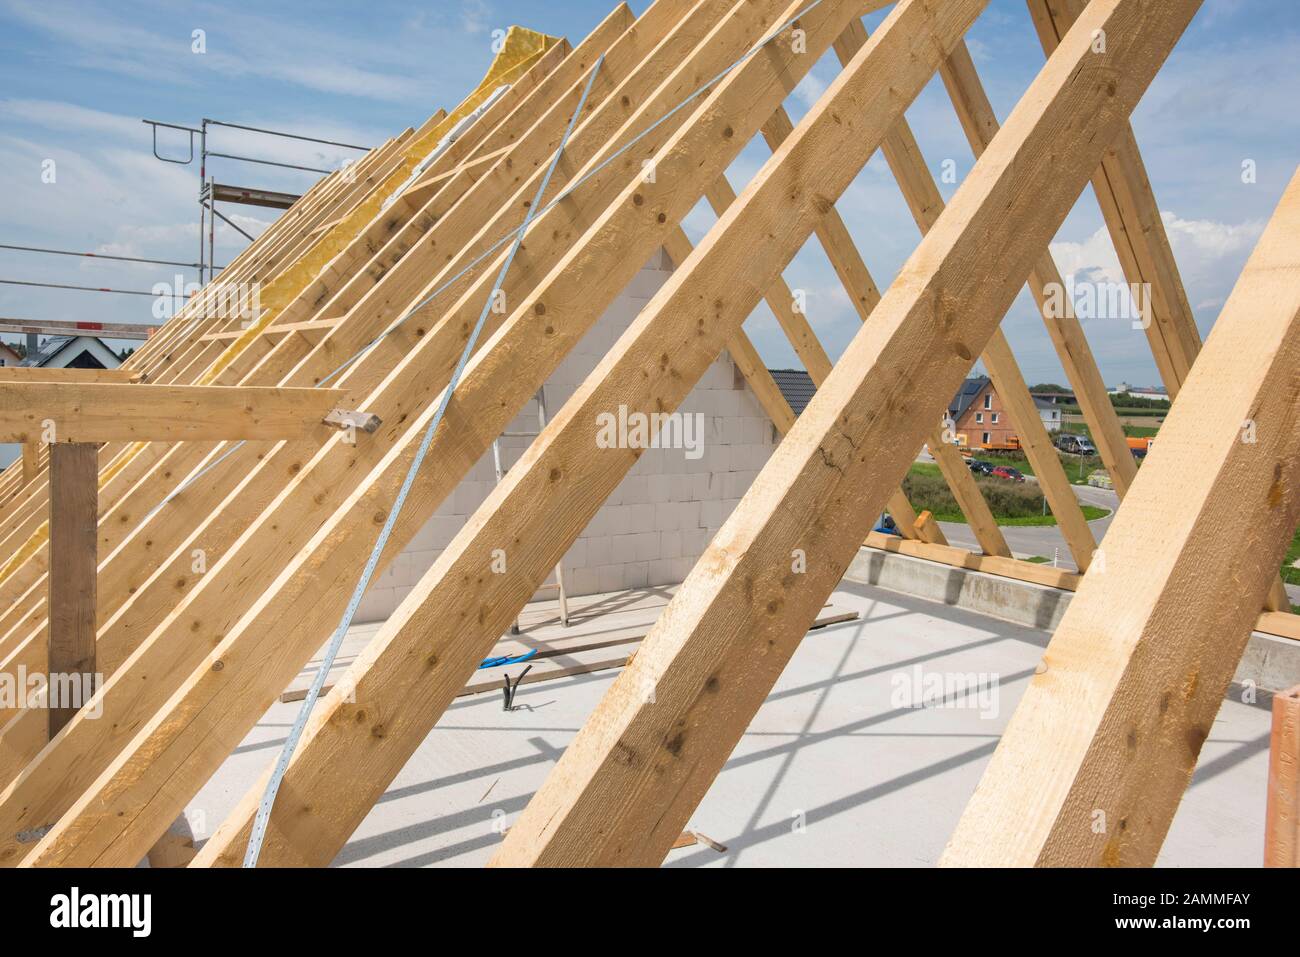 House building in shell with wooden beams in the roof truss [automated translation] Stock Photo